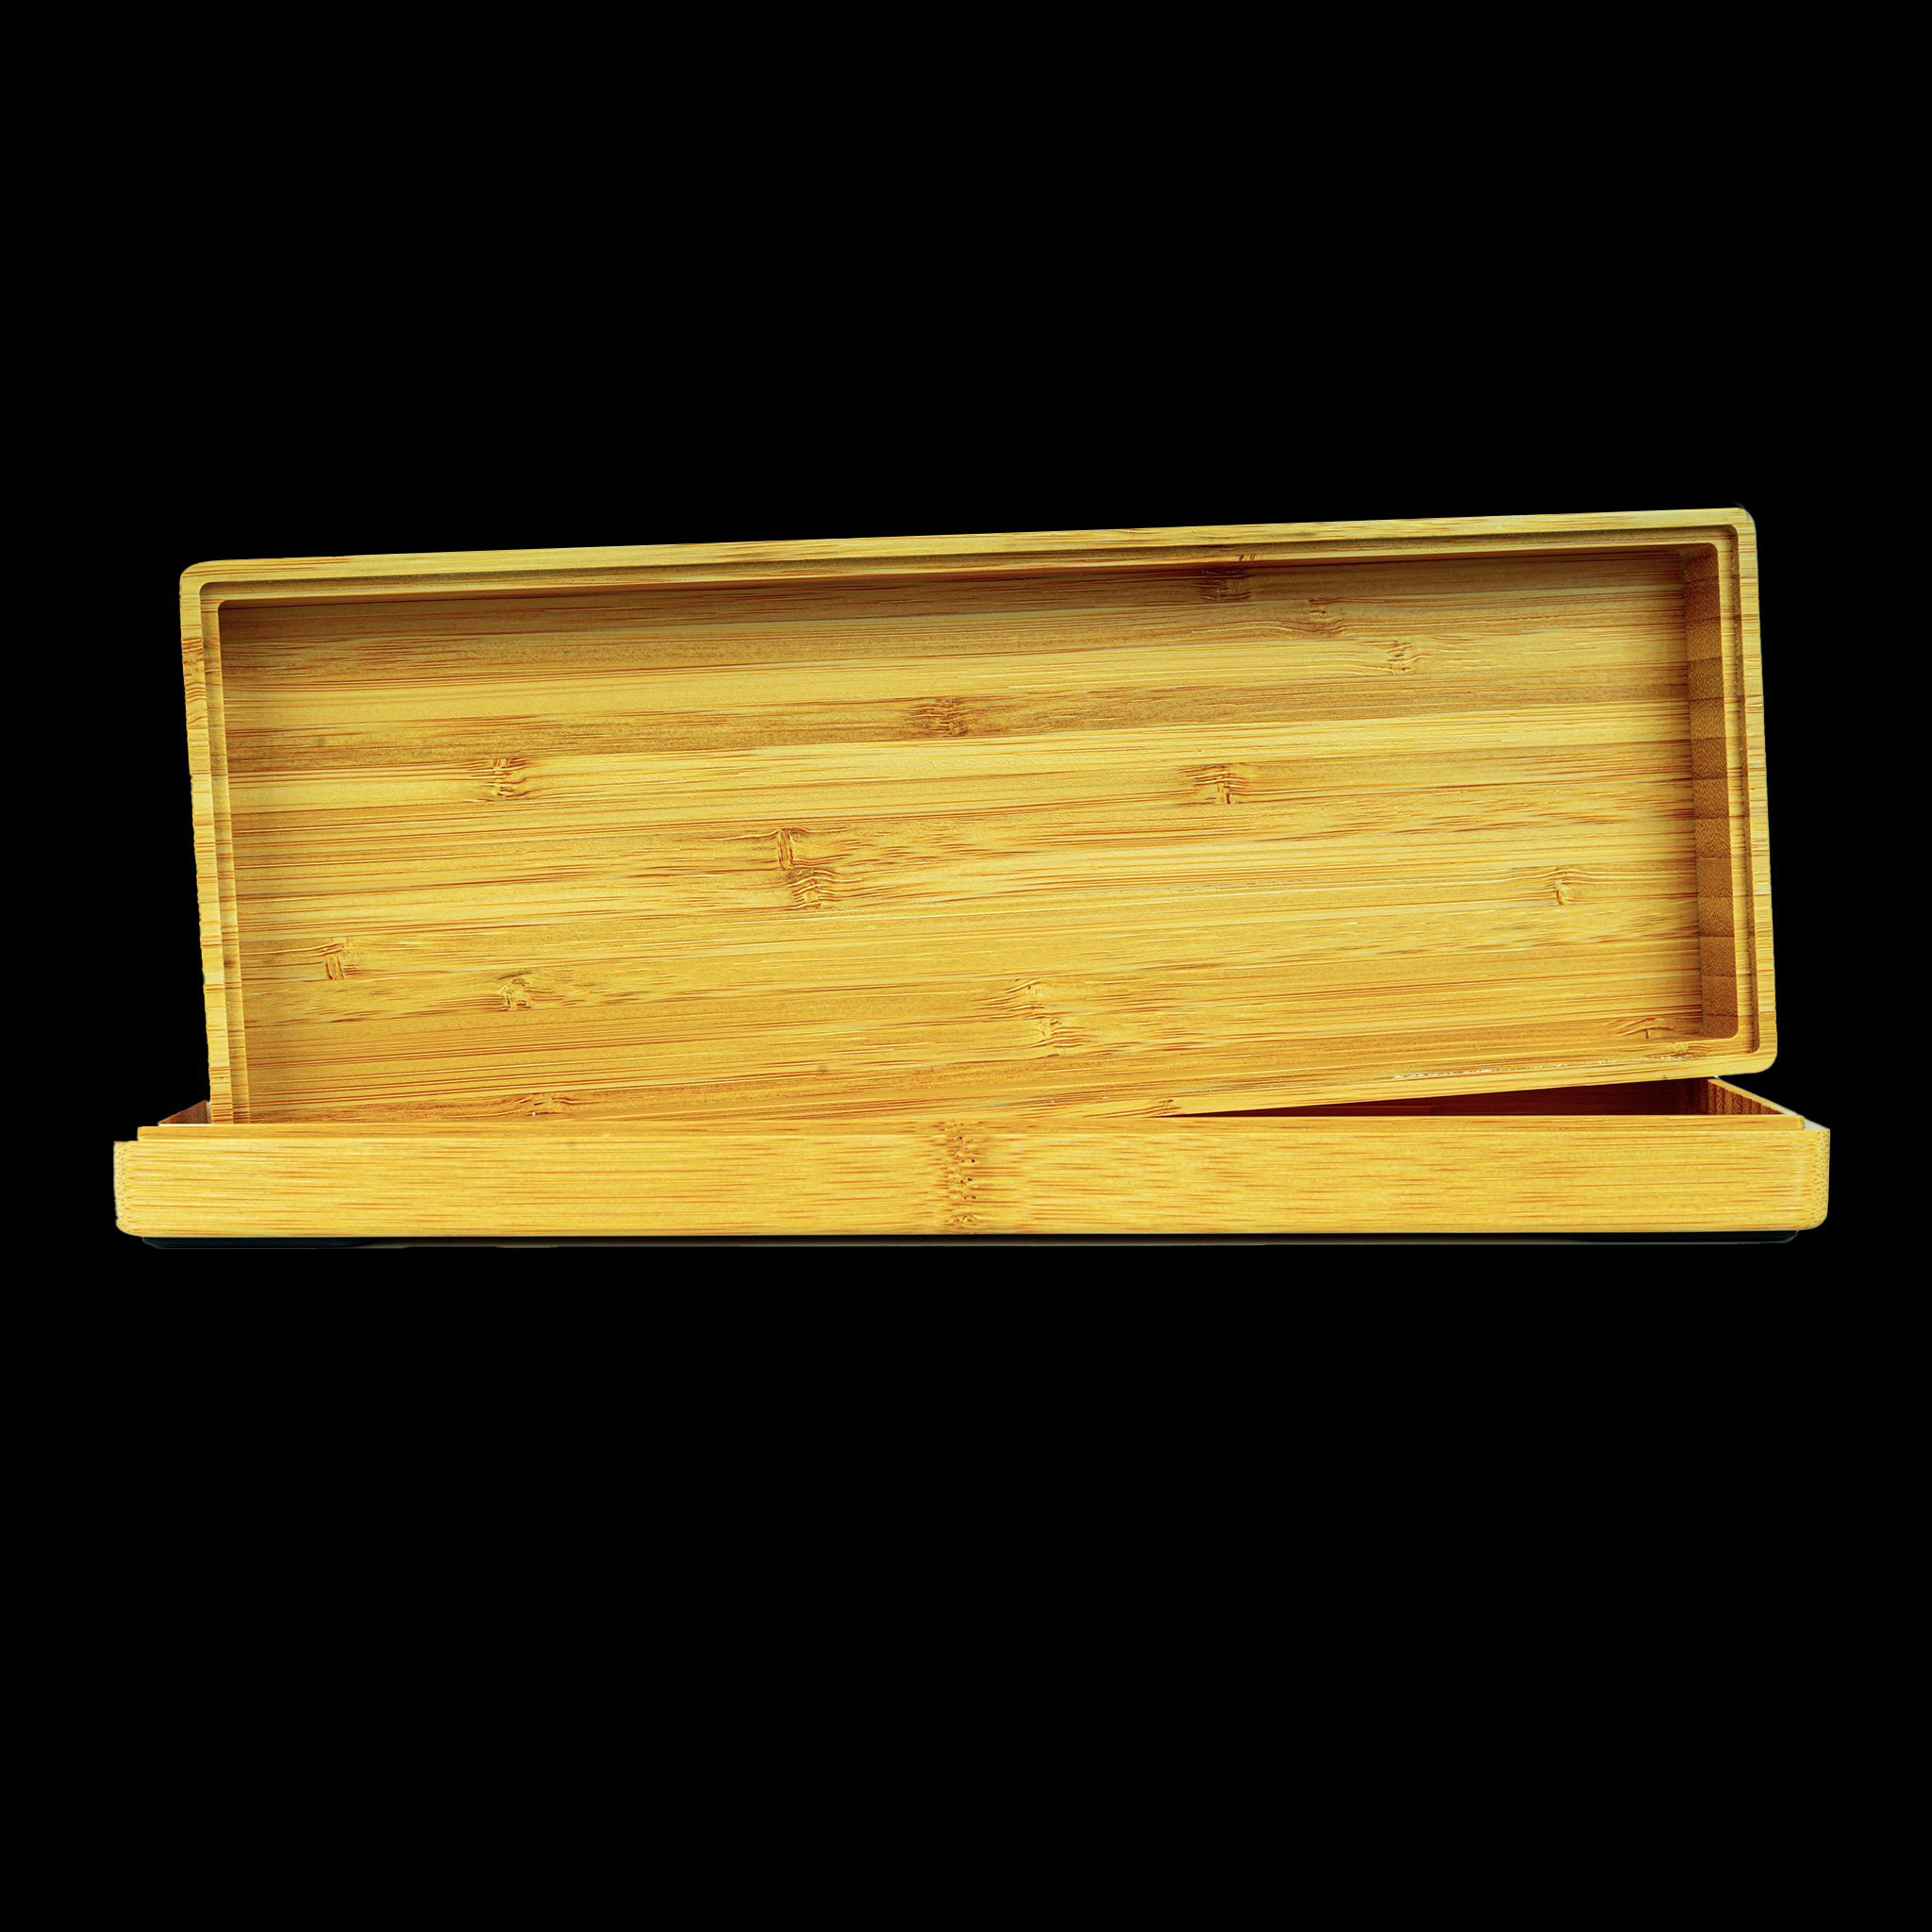 A universal 60%, low lightweight bamboo keyboard case that supports most common 60% keyboard PCBs such as DZ60, GH60, HS60 and Pok3r. The case includes a top cover also made out of bamboo.